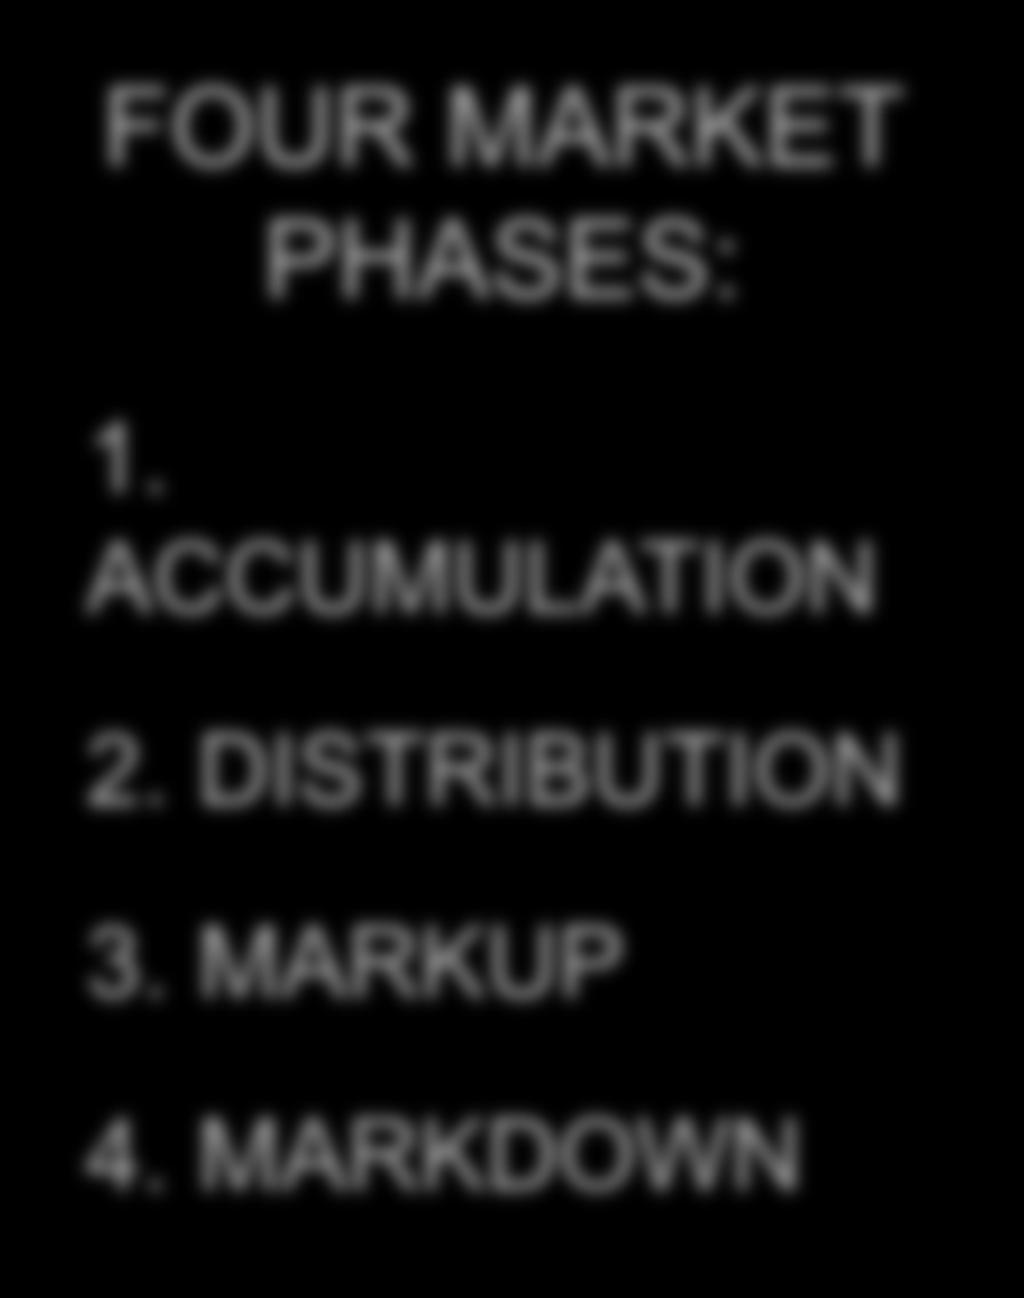 Four Market Phases The Four Market Phases were pioneered by Richard D. Wyckoff and help to provide understanding of the various price cycles, which allows for better market timing.